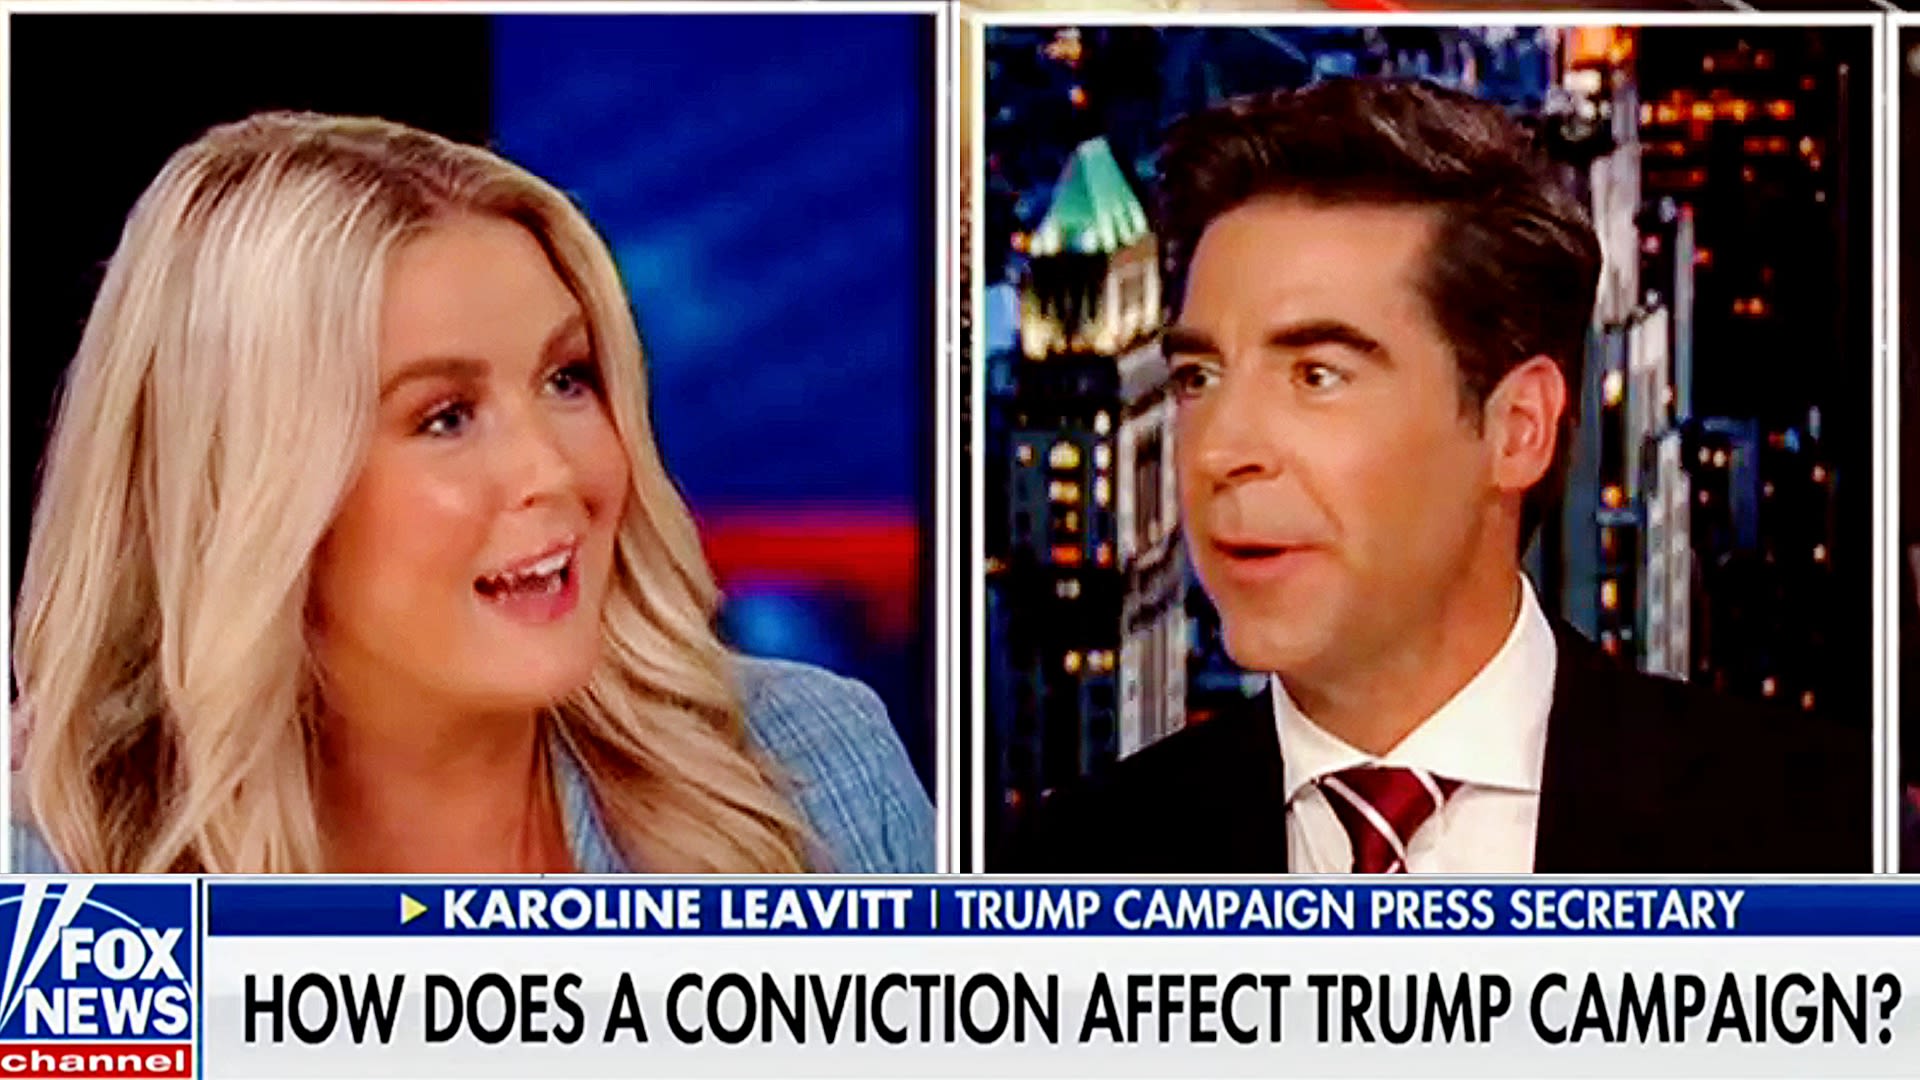 Fox Host Straight-Up Asks Trump National Spox ‘Will There Be Any Revenge?’ On Prosecutors If Trump Wins